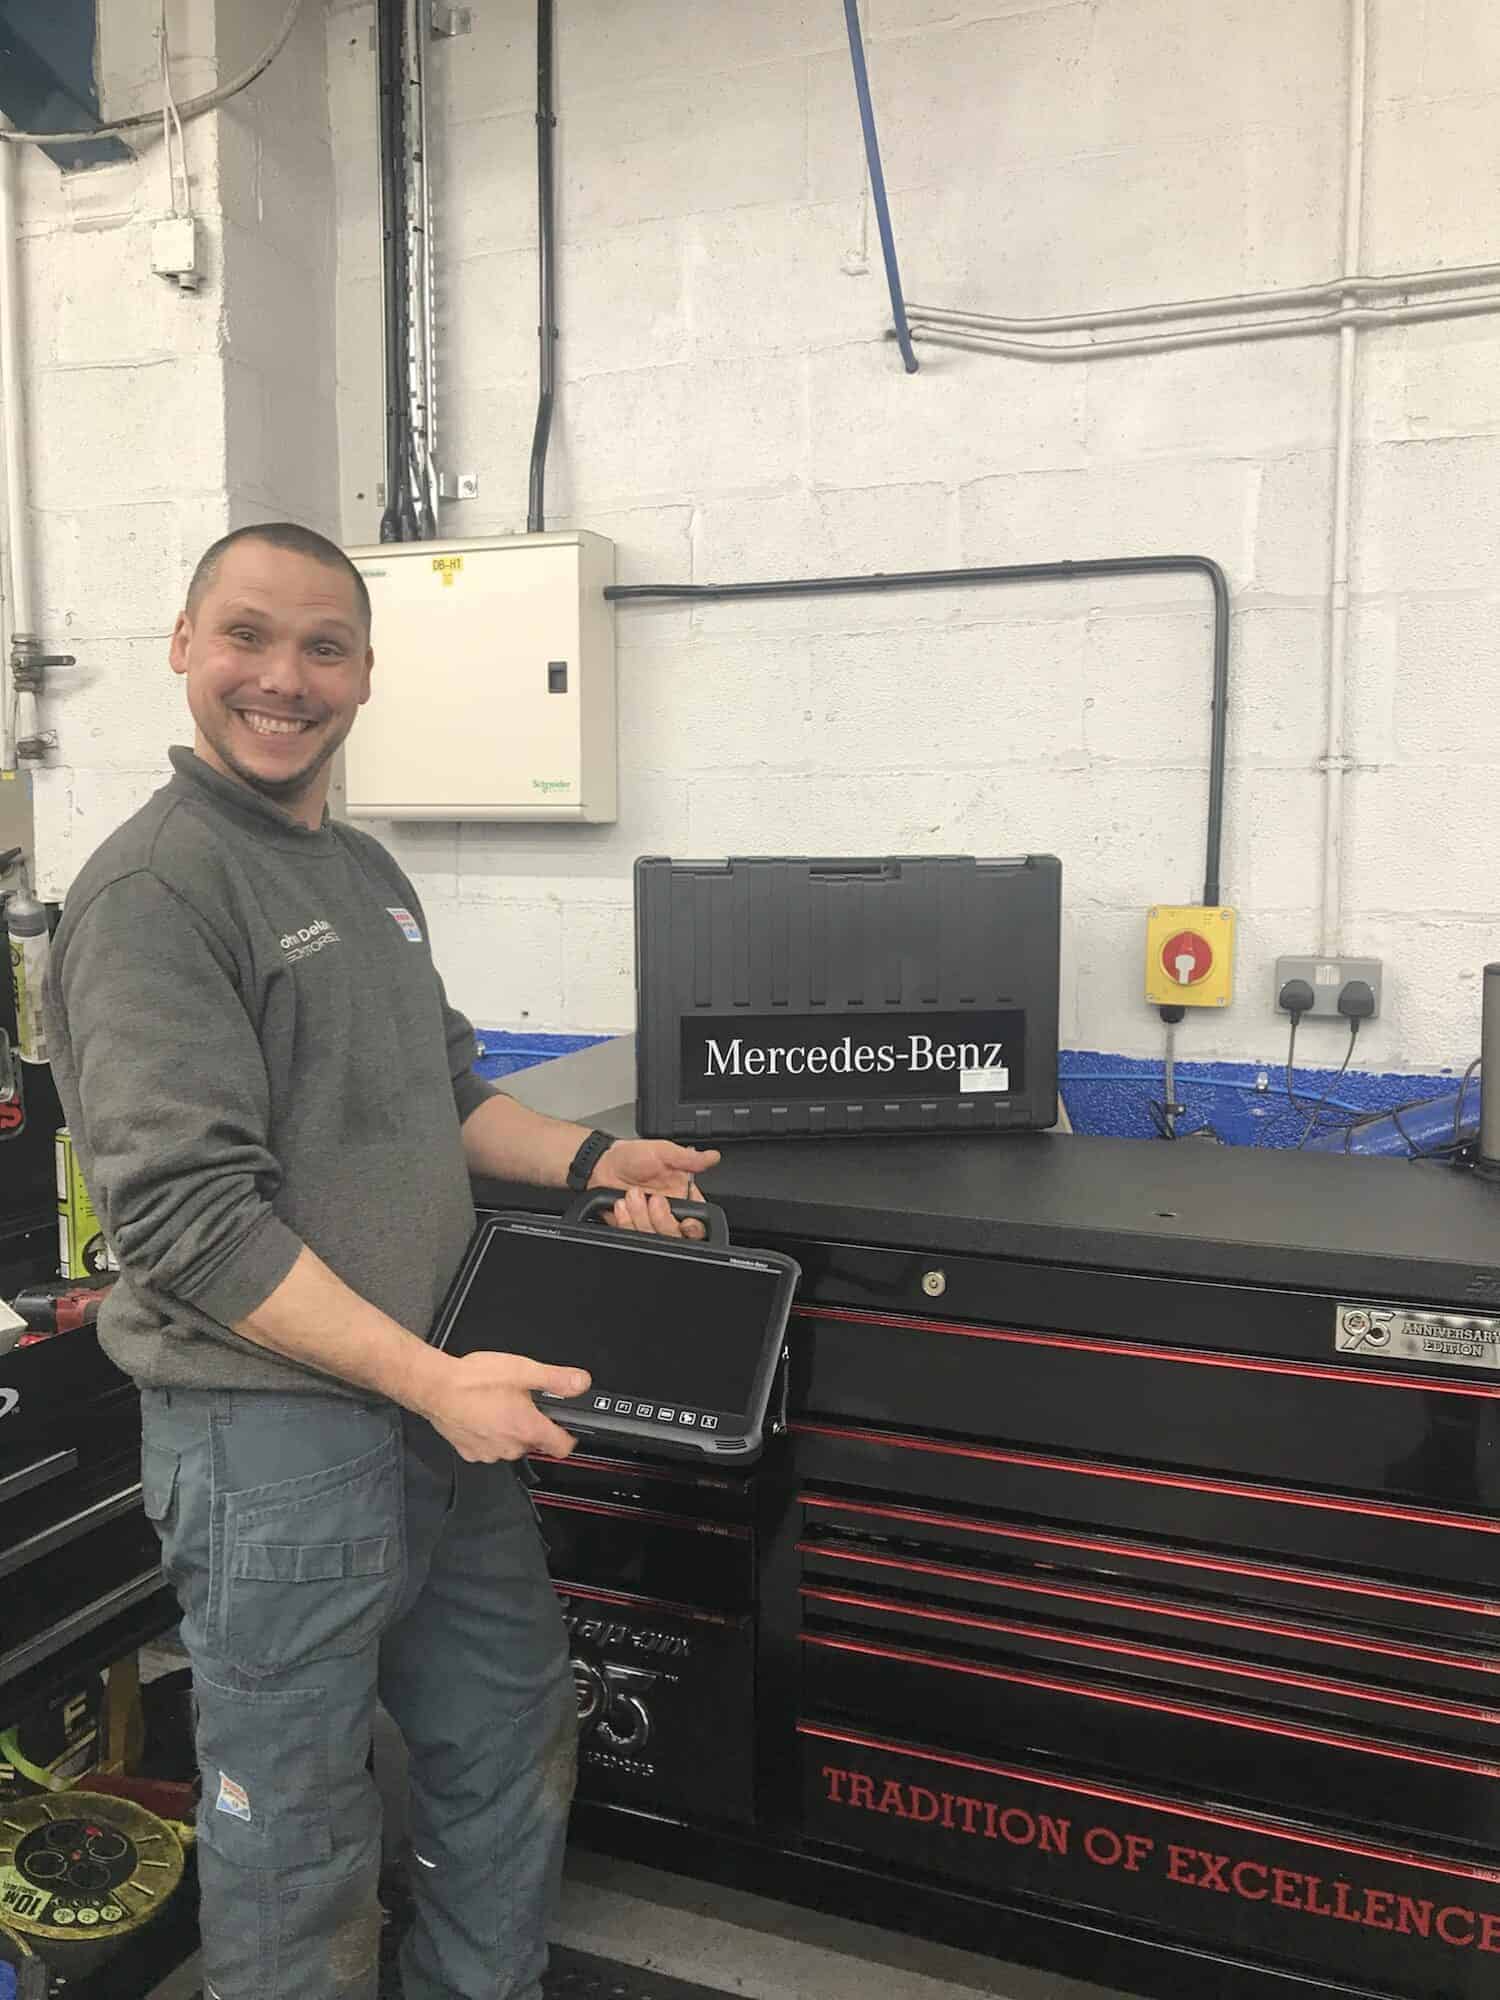 Our new Mercedes Star Diagnostic Testing Equipment has landed